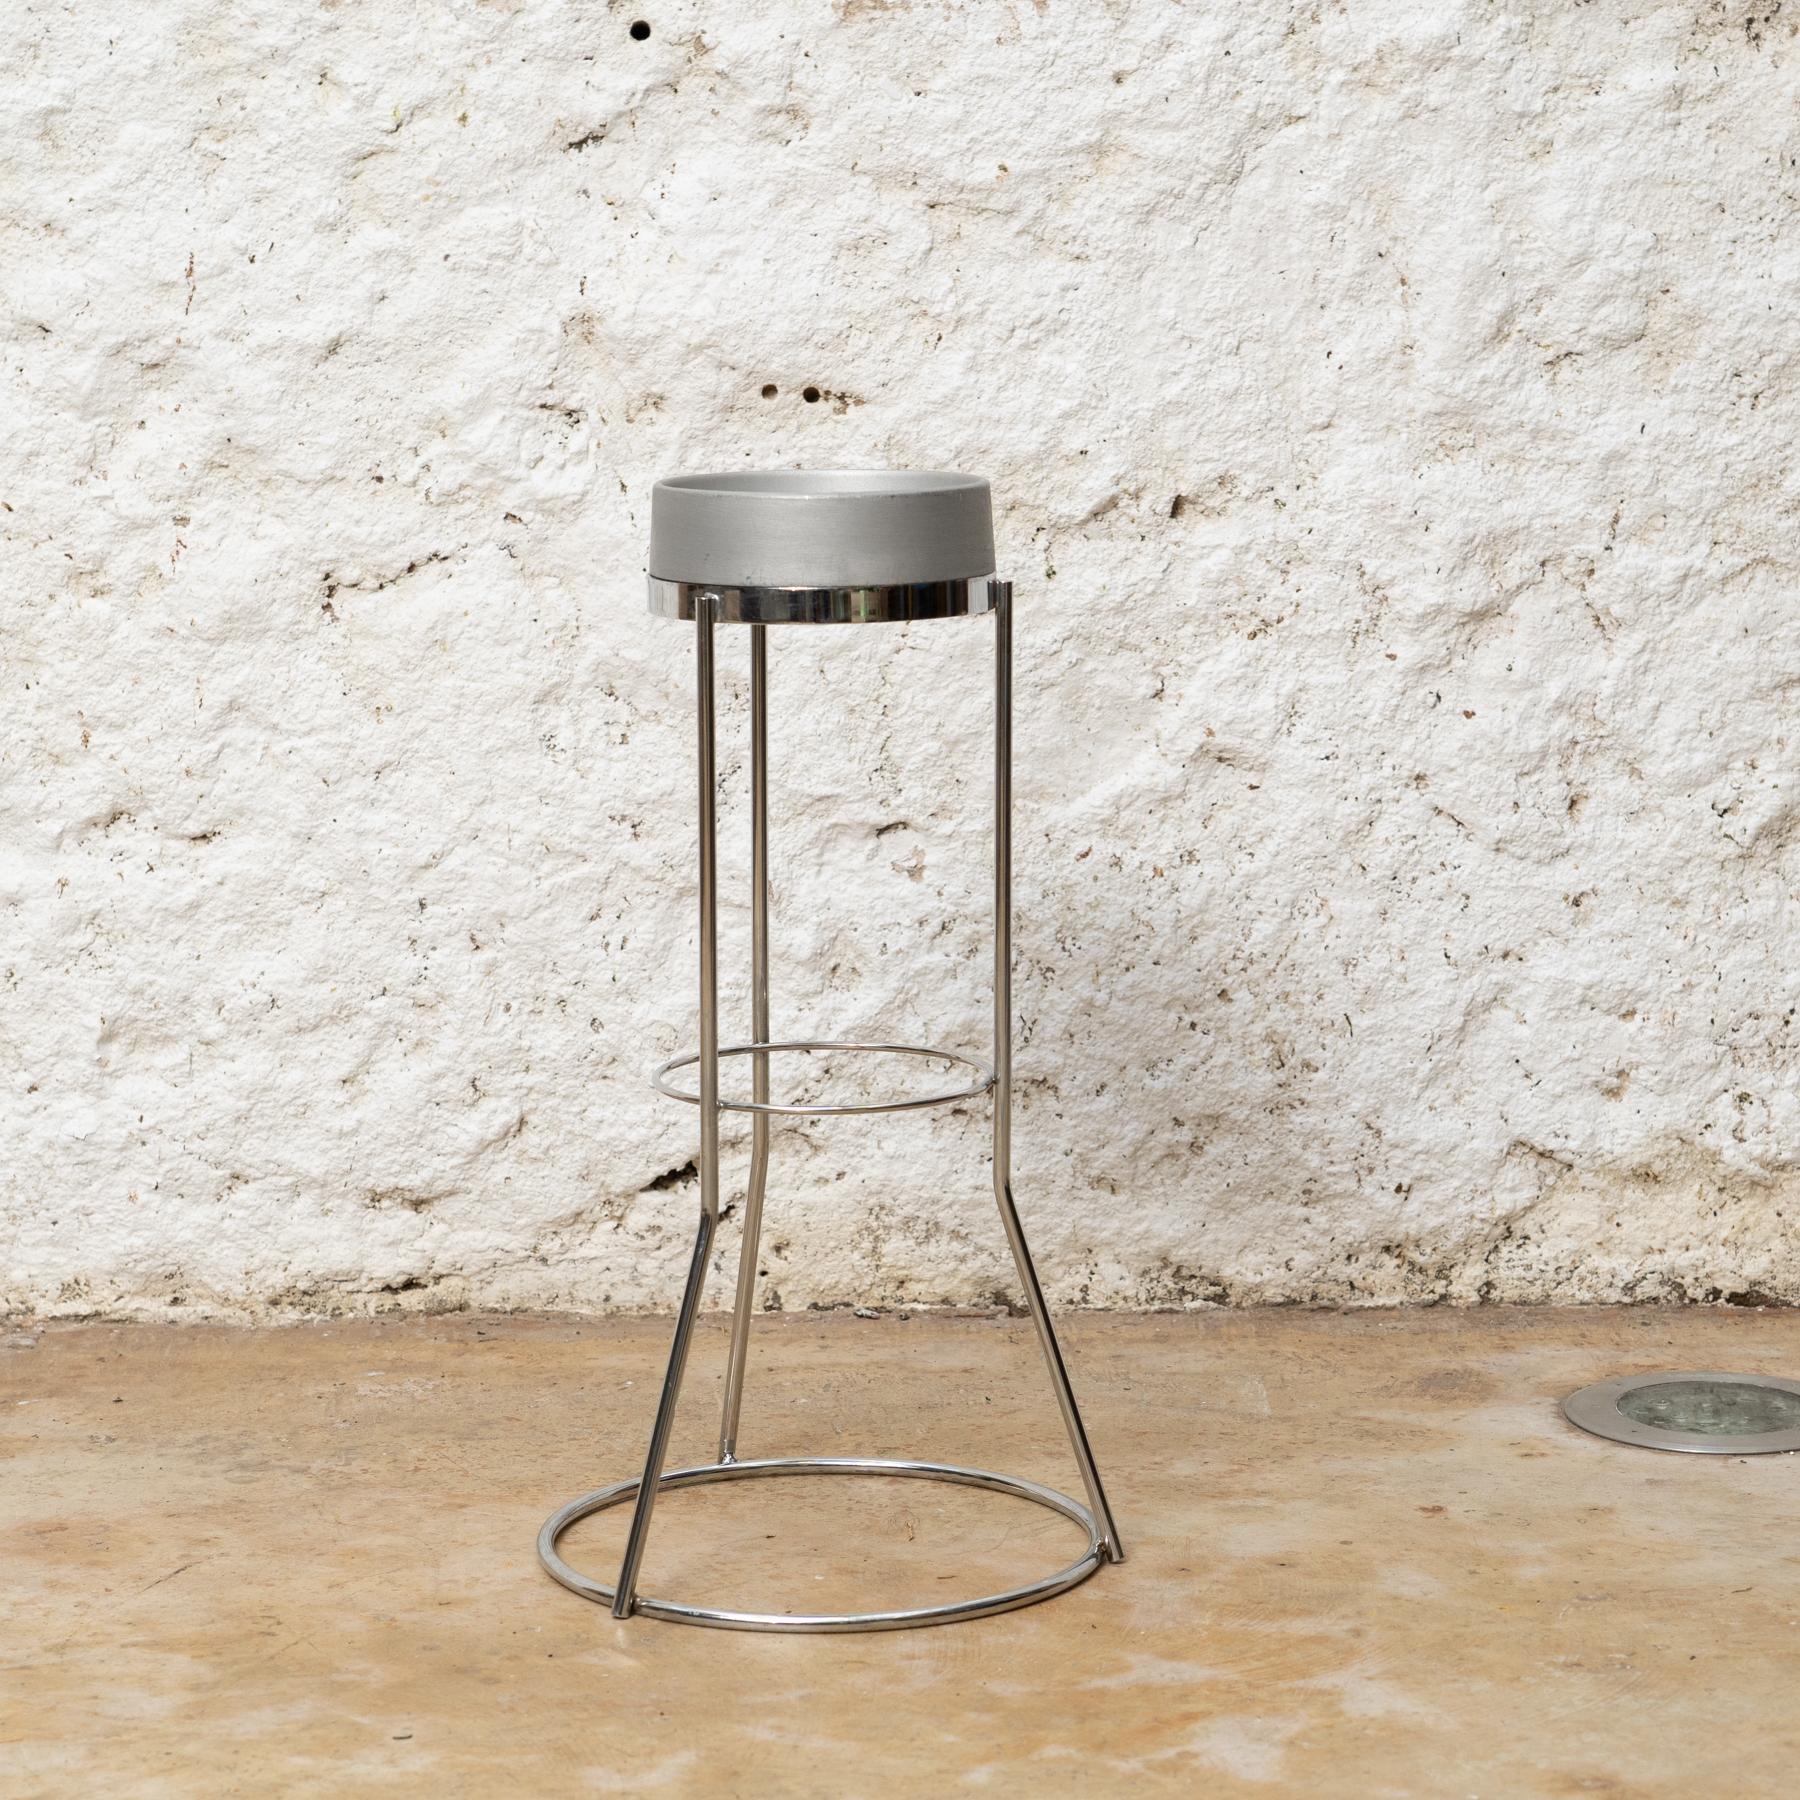 Spanish Umbrella Stand Tomba’l by Miguel Milà for Misel·lania, circa 1989 For Sale